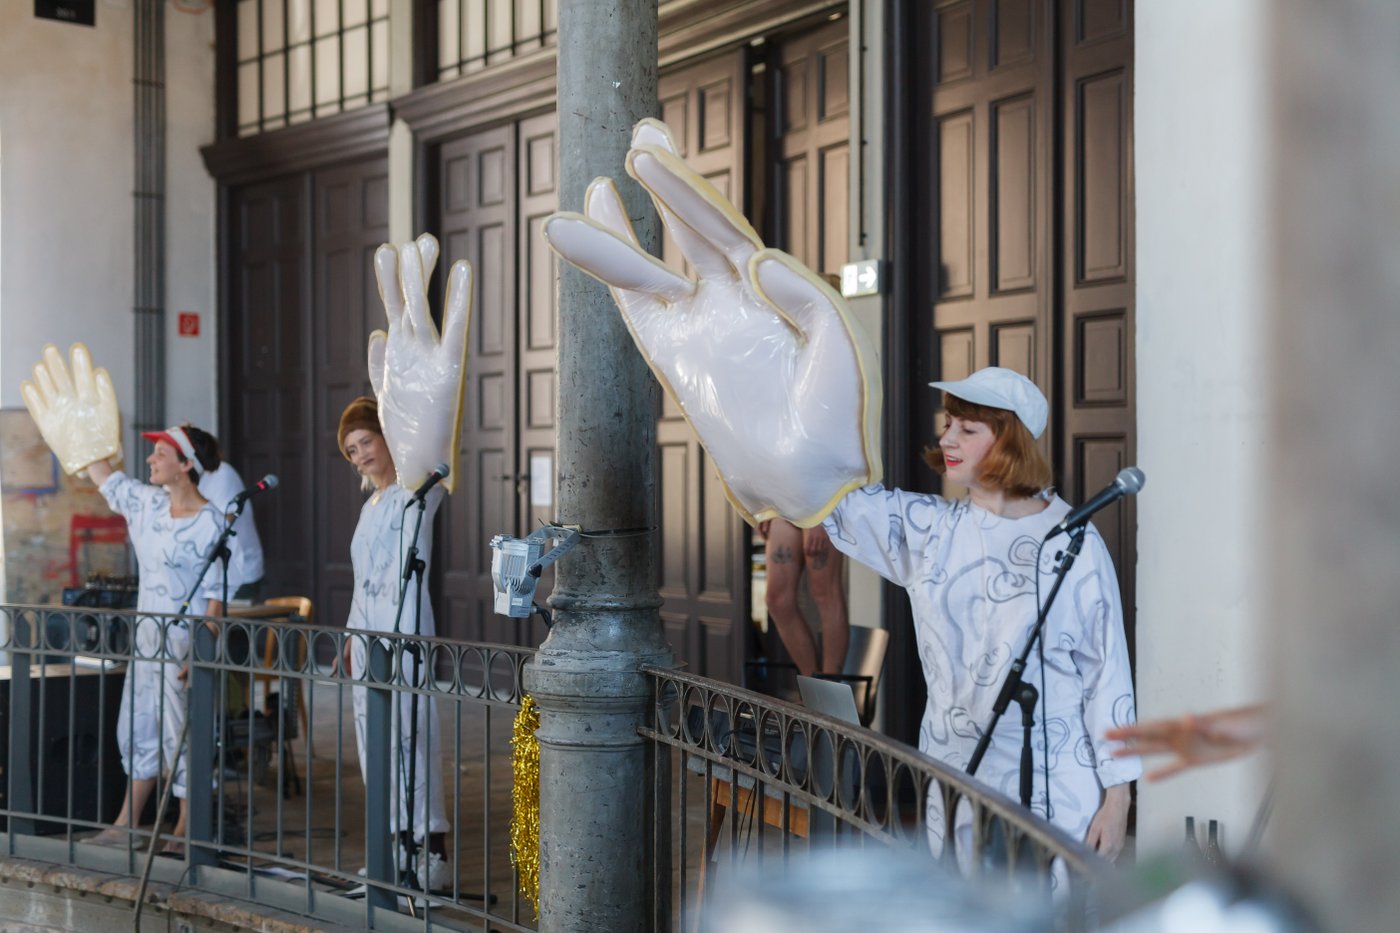 3 Women with oversized dummy hands wave to the audience as part of their performance in the Prospect Courtyard (large high space spanning 4 floors with galleries on each floor) during the 2019 graduation ceremony.